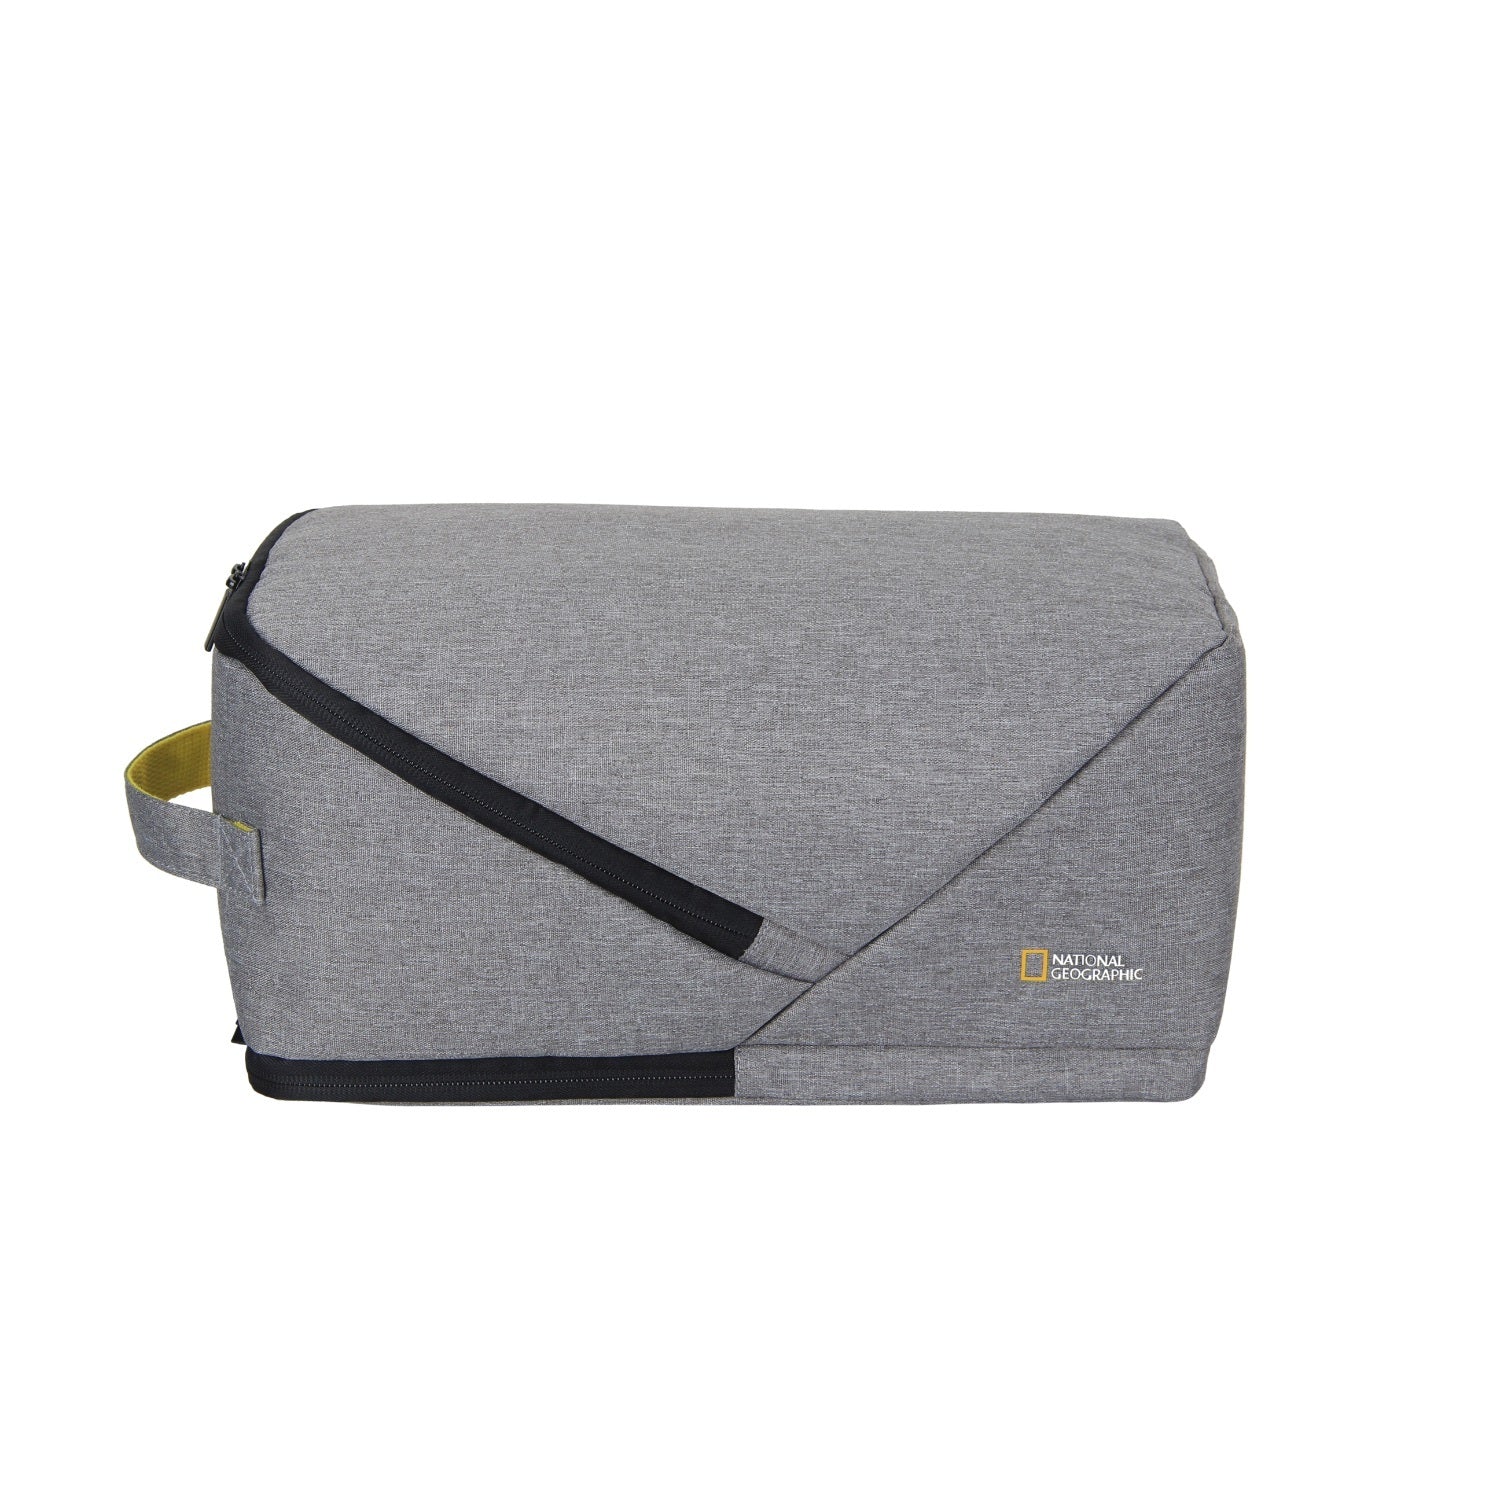 National Geographic - Eco Travel Shoe protection bag - Grey